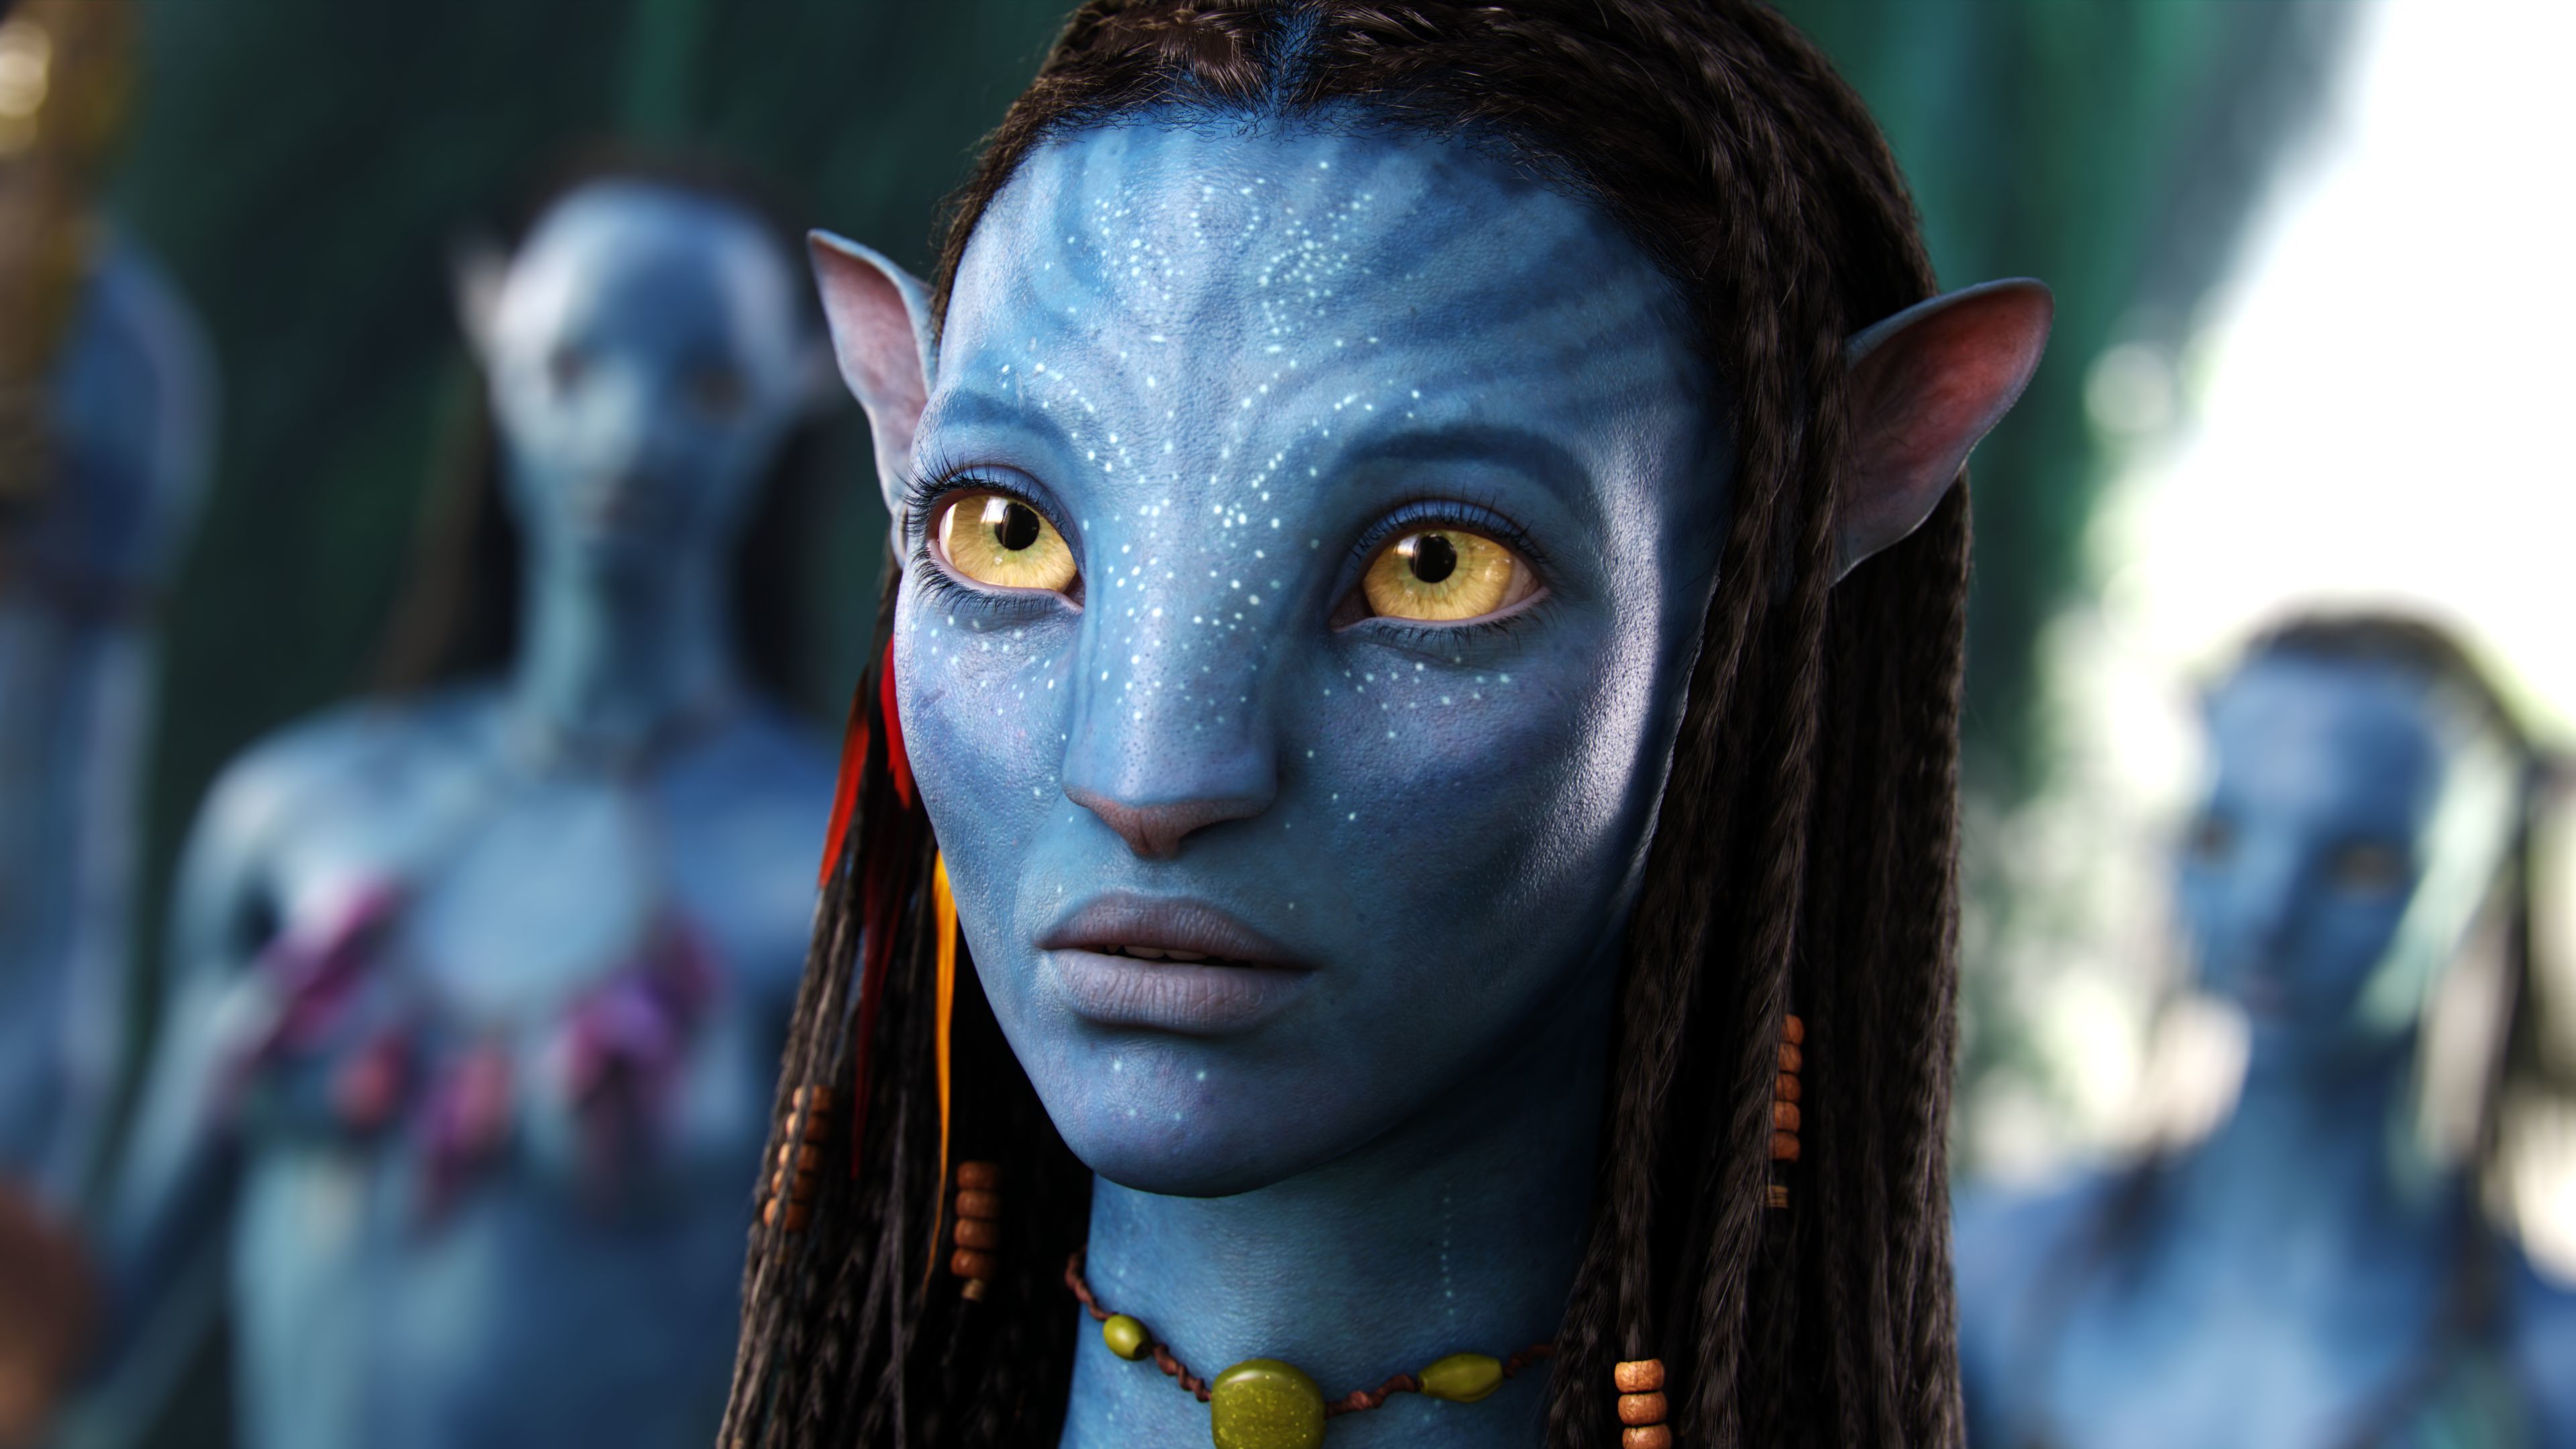 Avatar plunges beneath the surface with new technology  Los Angeles Times